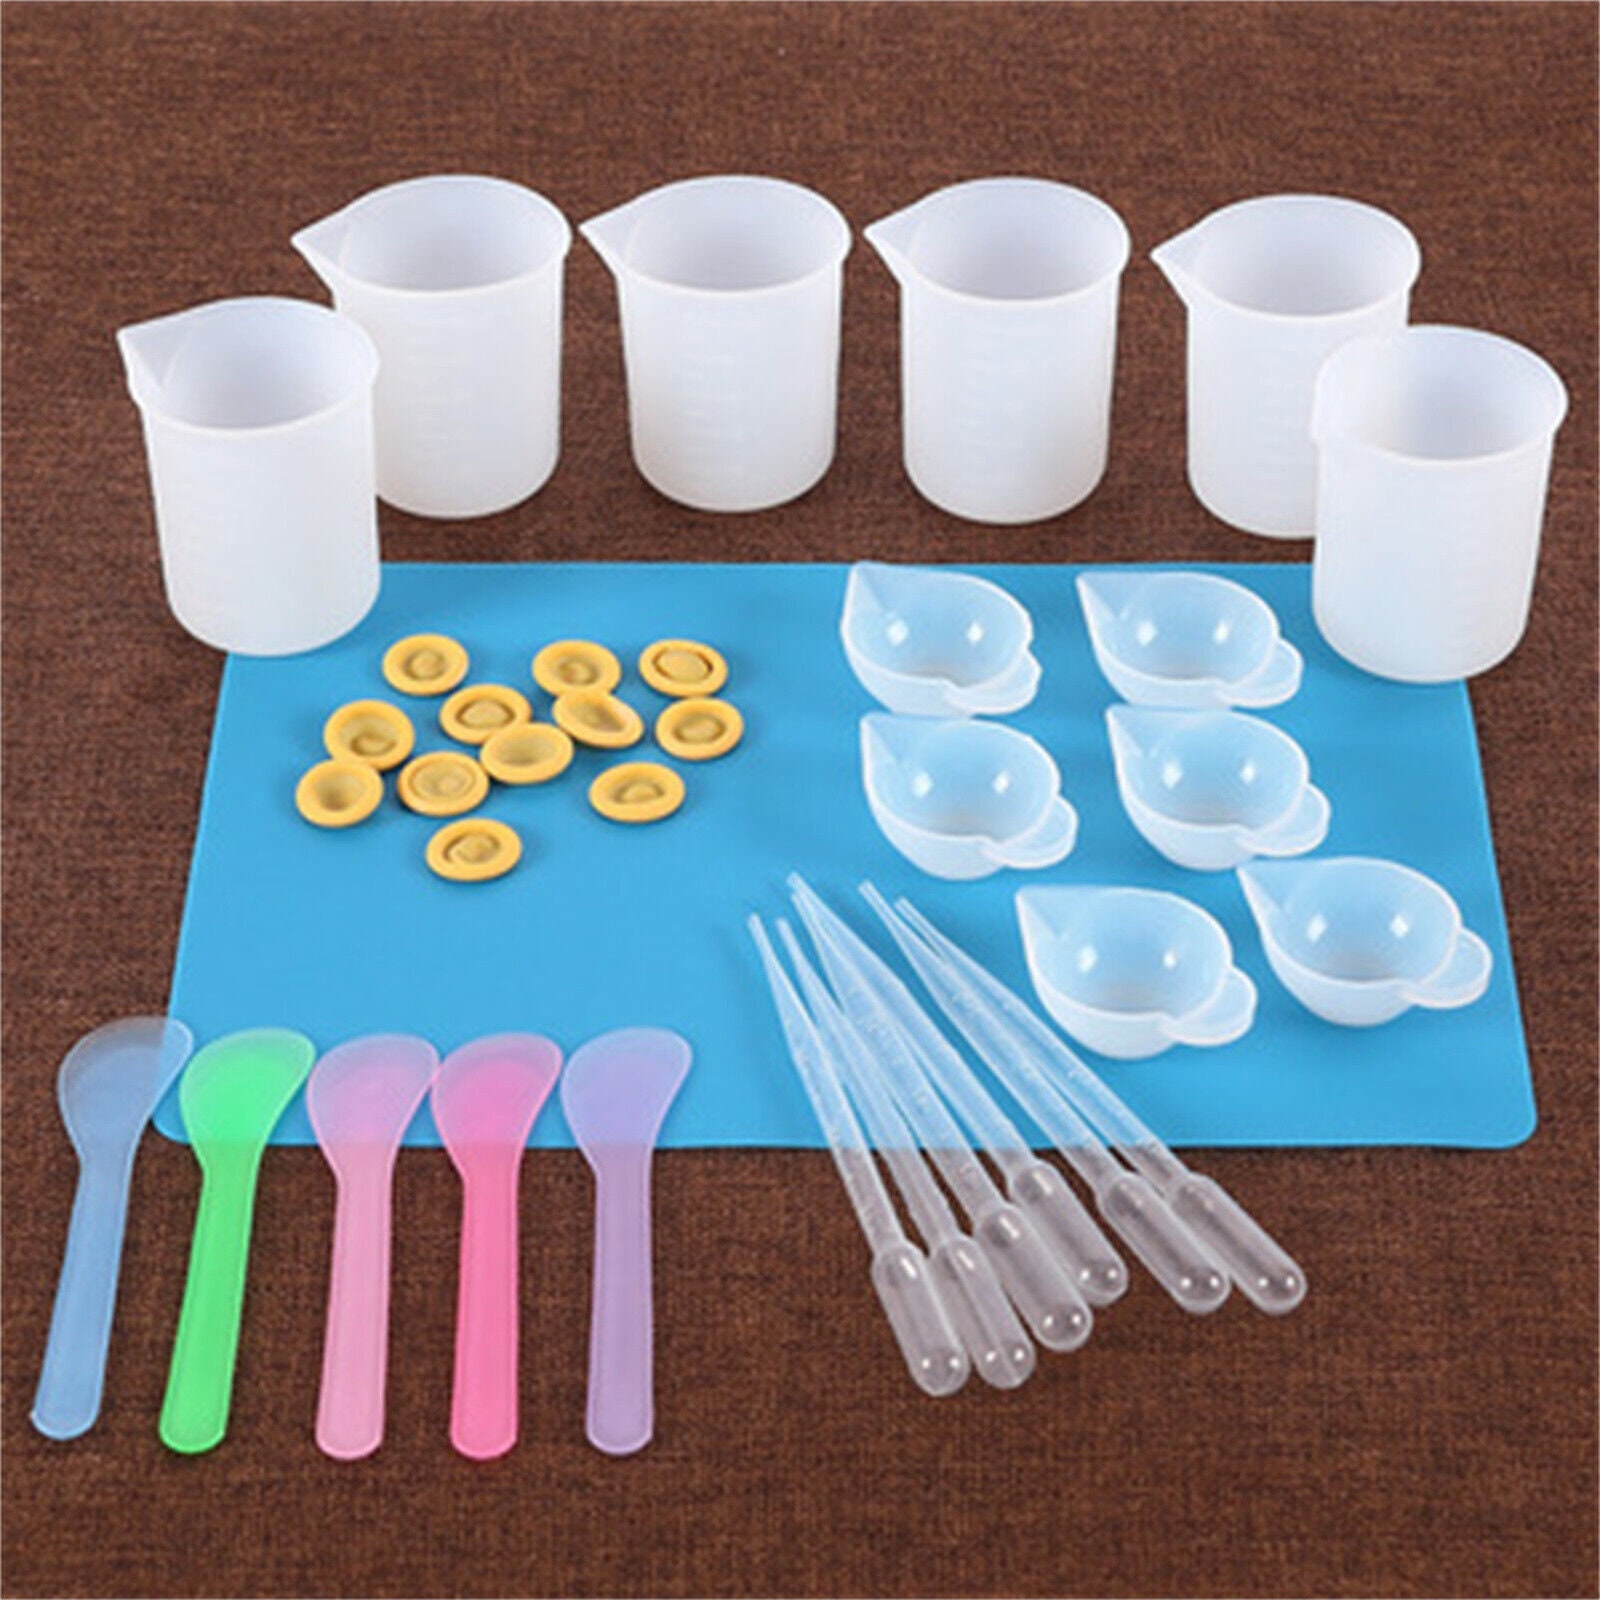 Reusable Resin Tools Supplies with ,Mixing Cup , ,Silicone Set Epoxy Resin  Tool Starter resin material s , 30Pcs